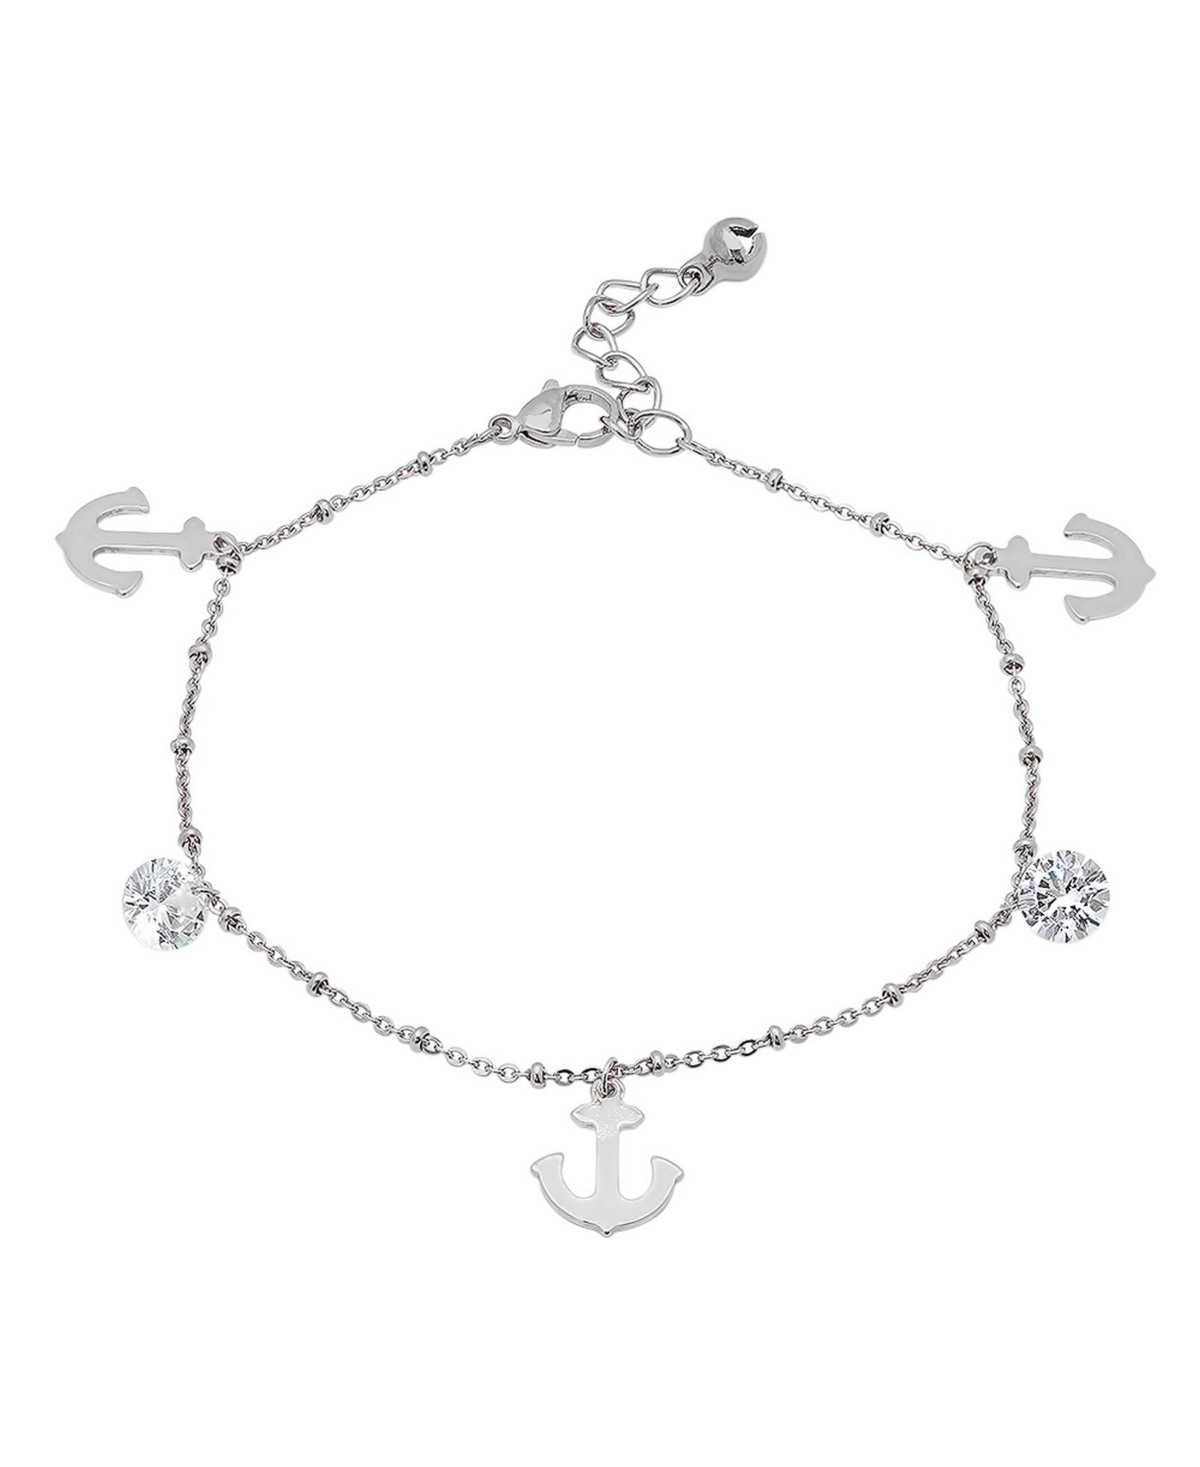 Stainless Steel Anchor Charm Adjustable Anklet - Silver-Plated